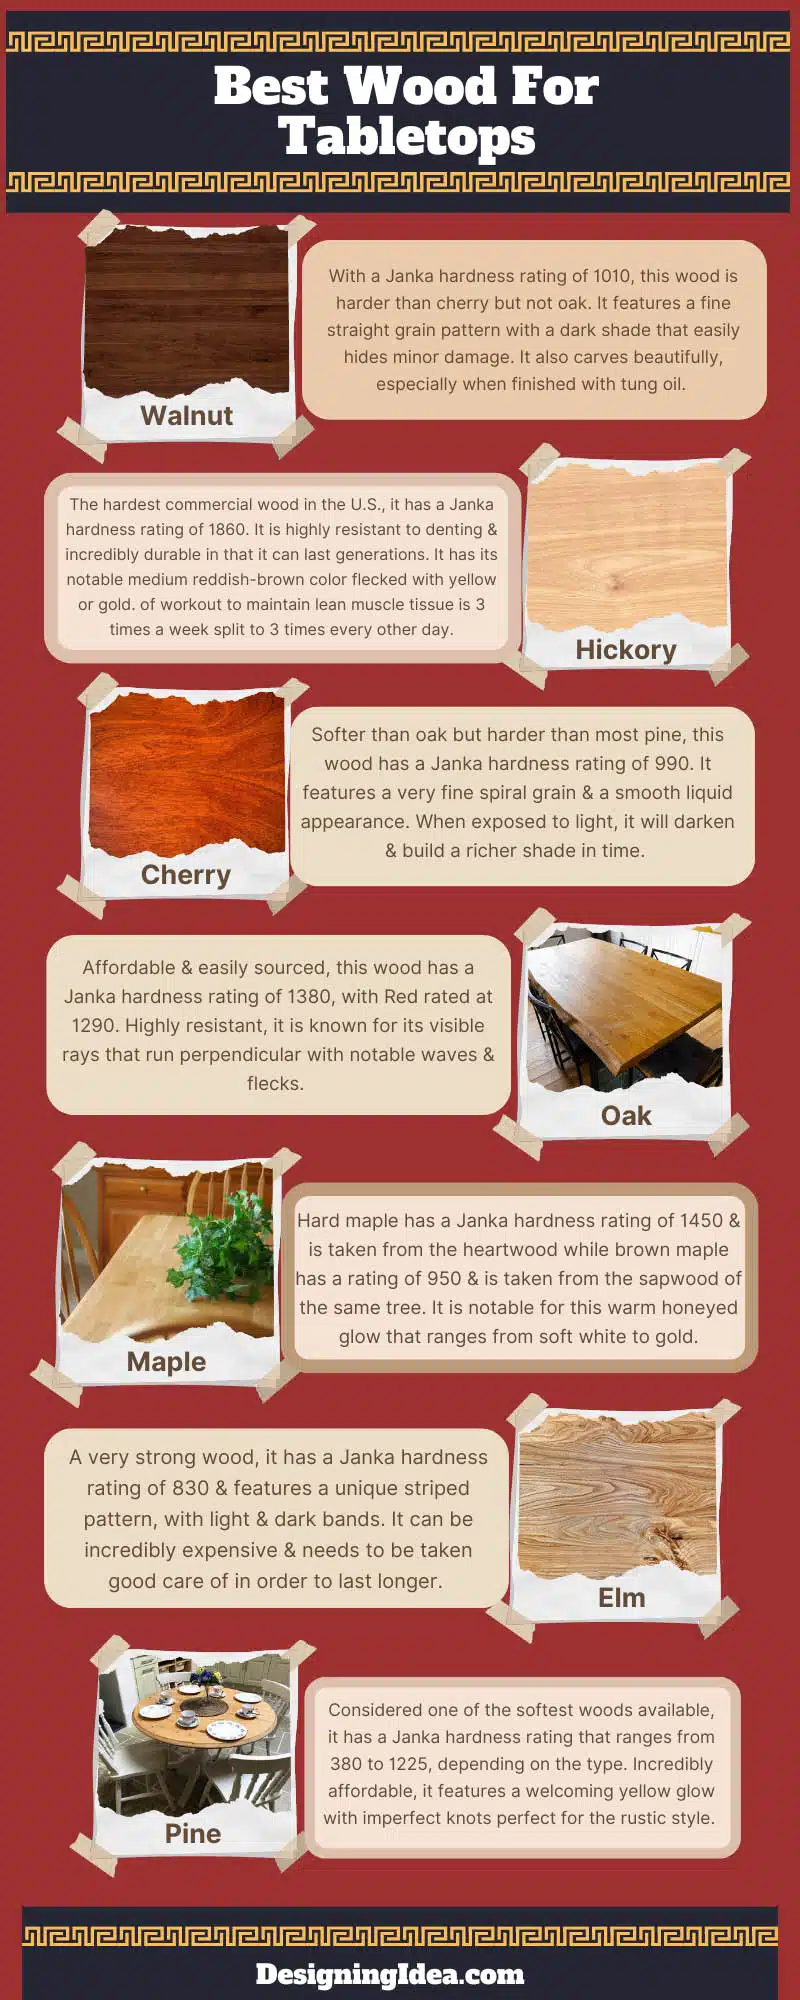 Best Wood For Tabletops Infographic